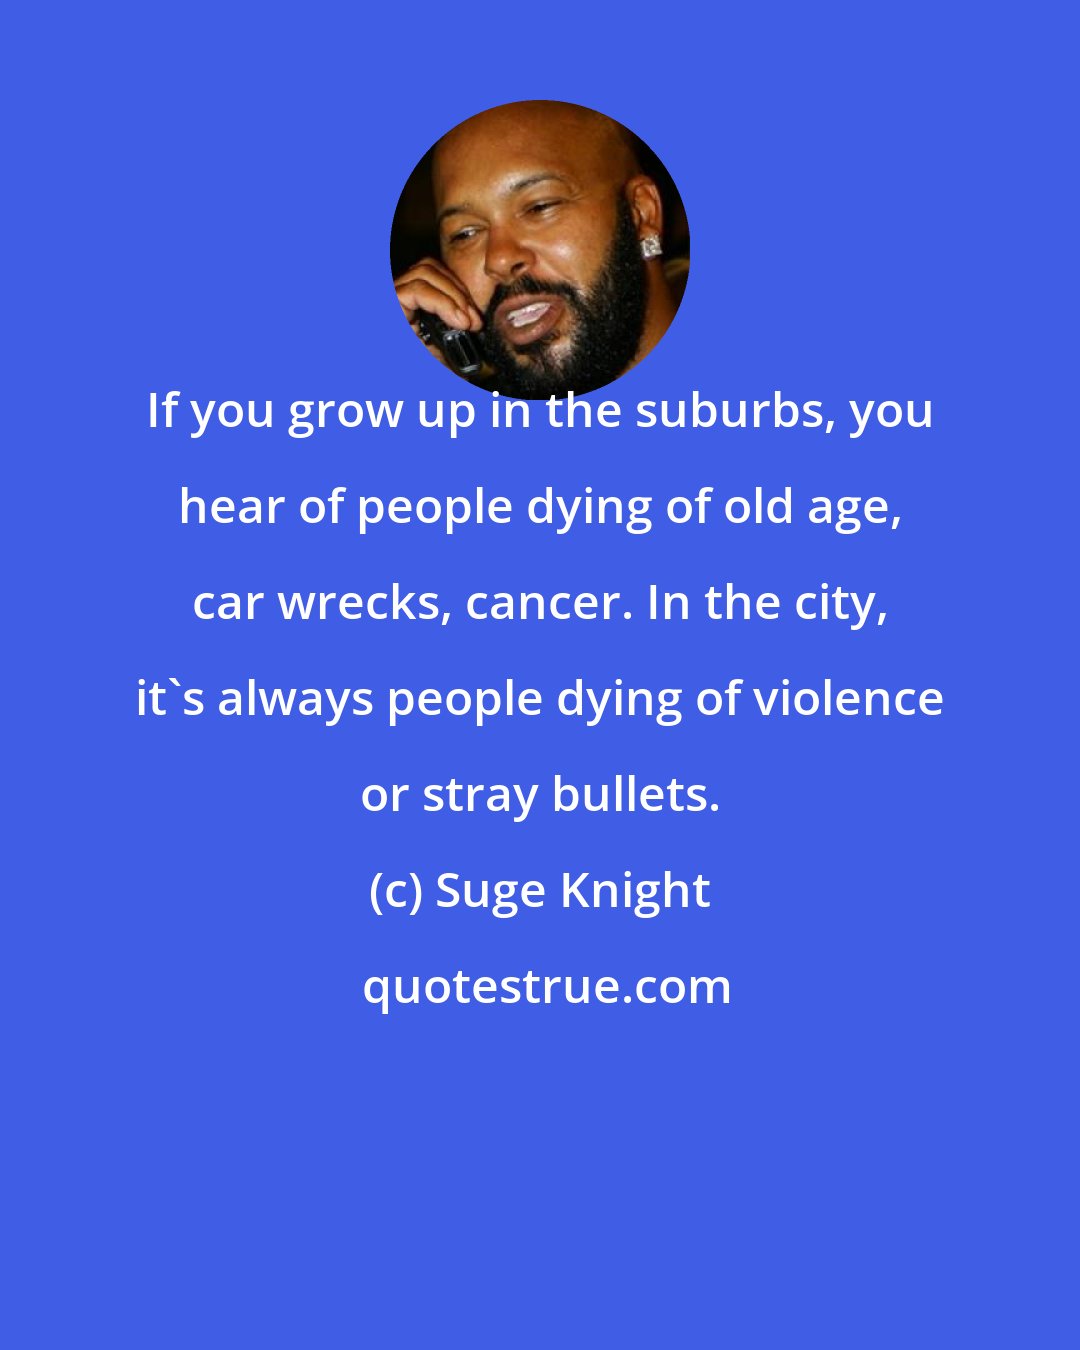 Suge Knight: If you grow up in the suburbs, you hear of people dying of old age, car wrecks, cancer. In the city, it's always people dying of violence or stray bullets.